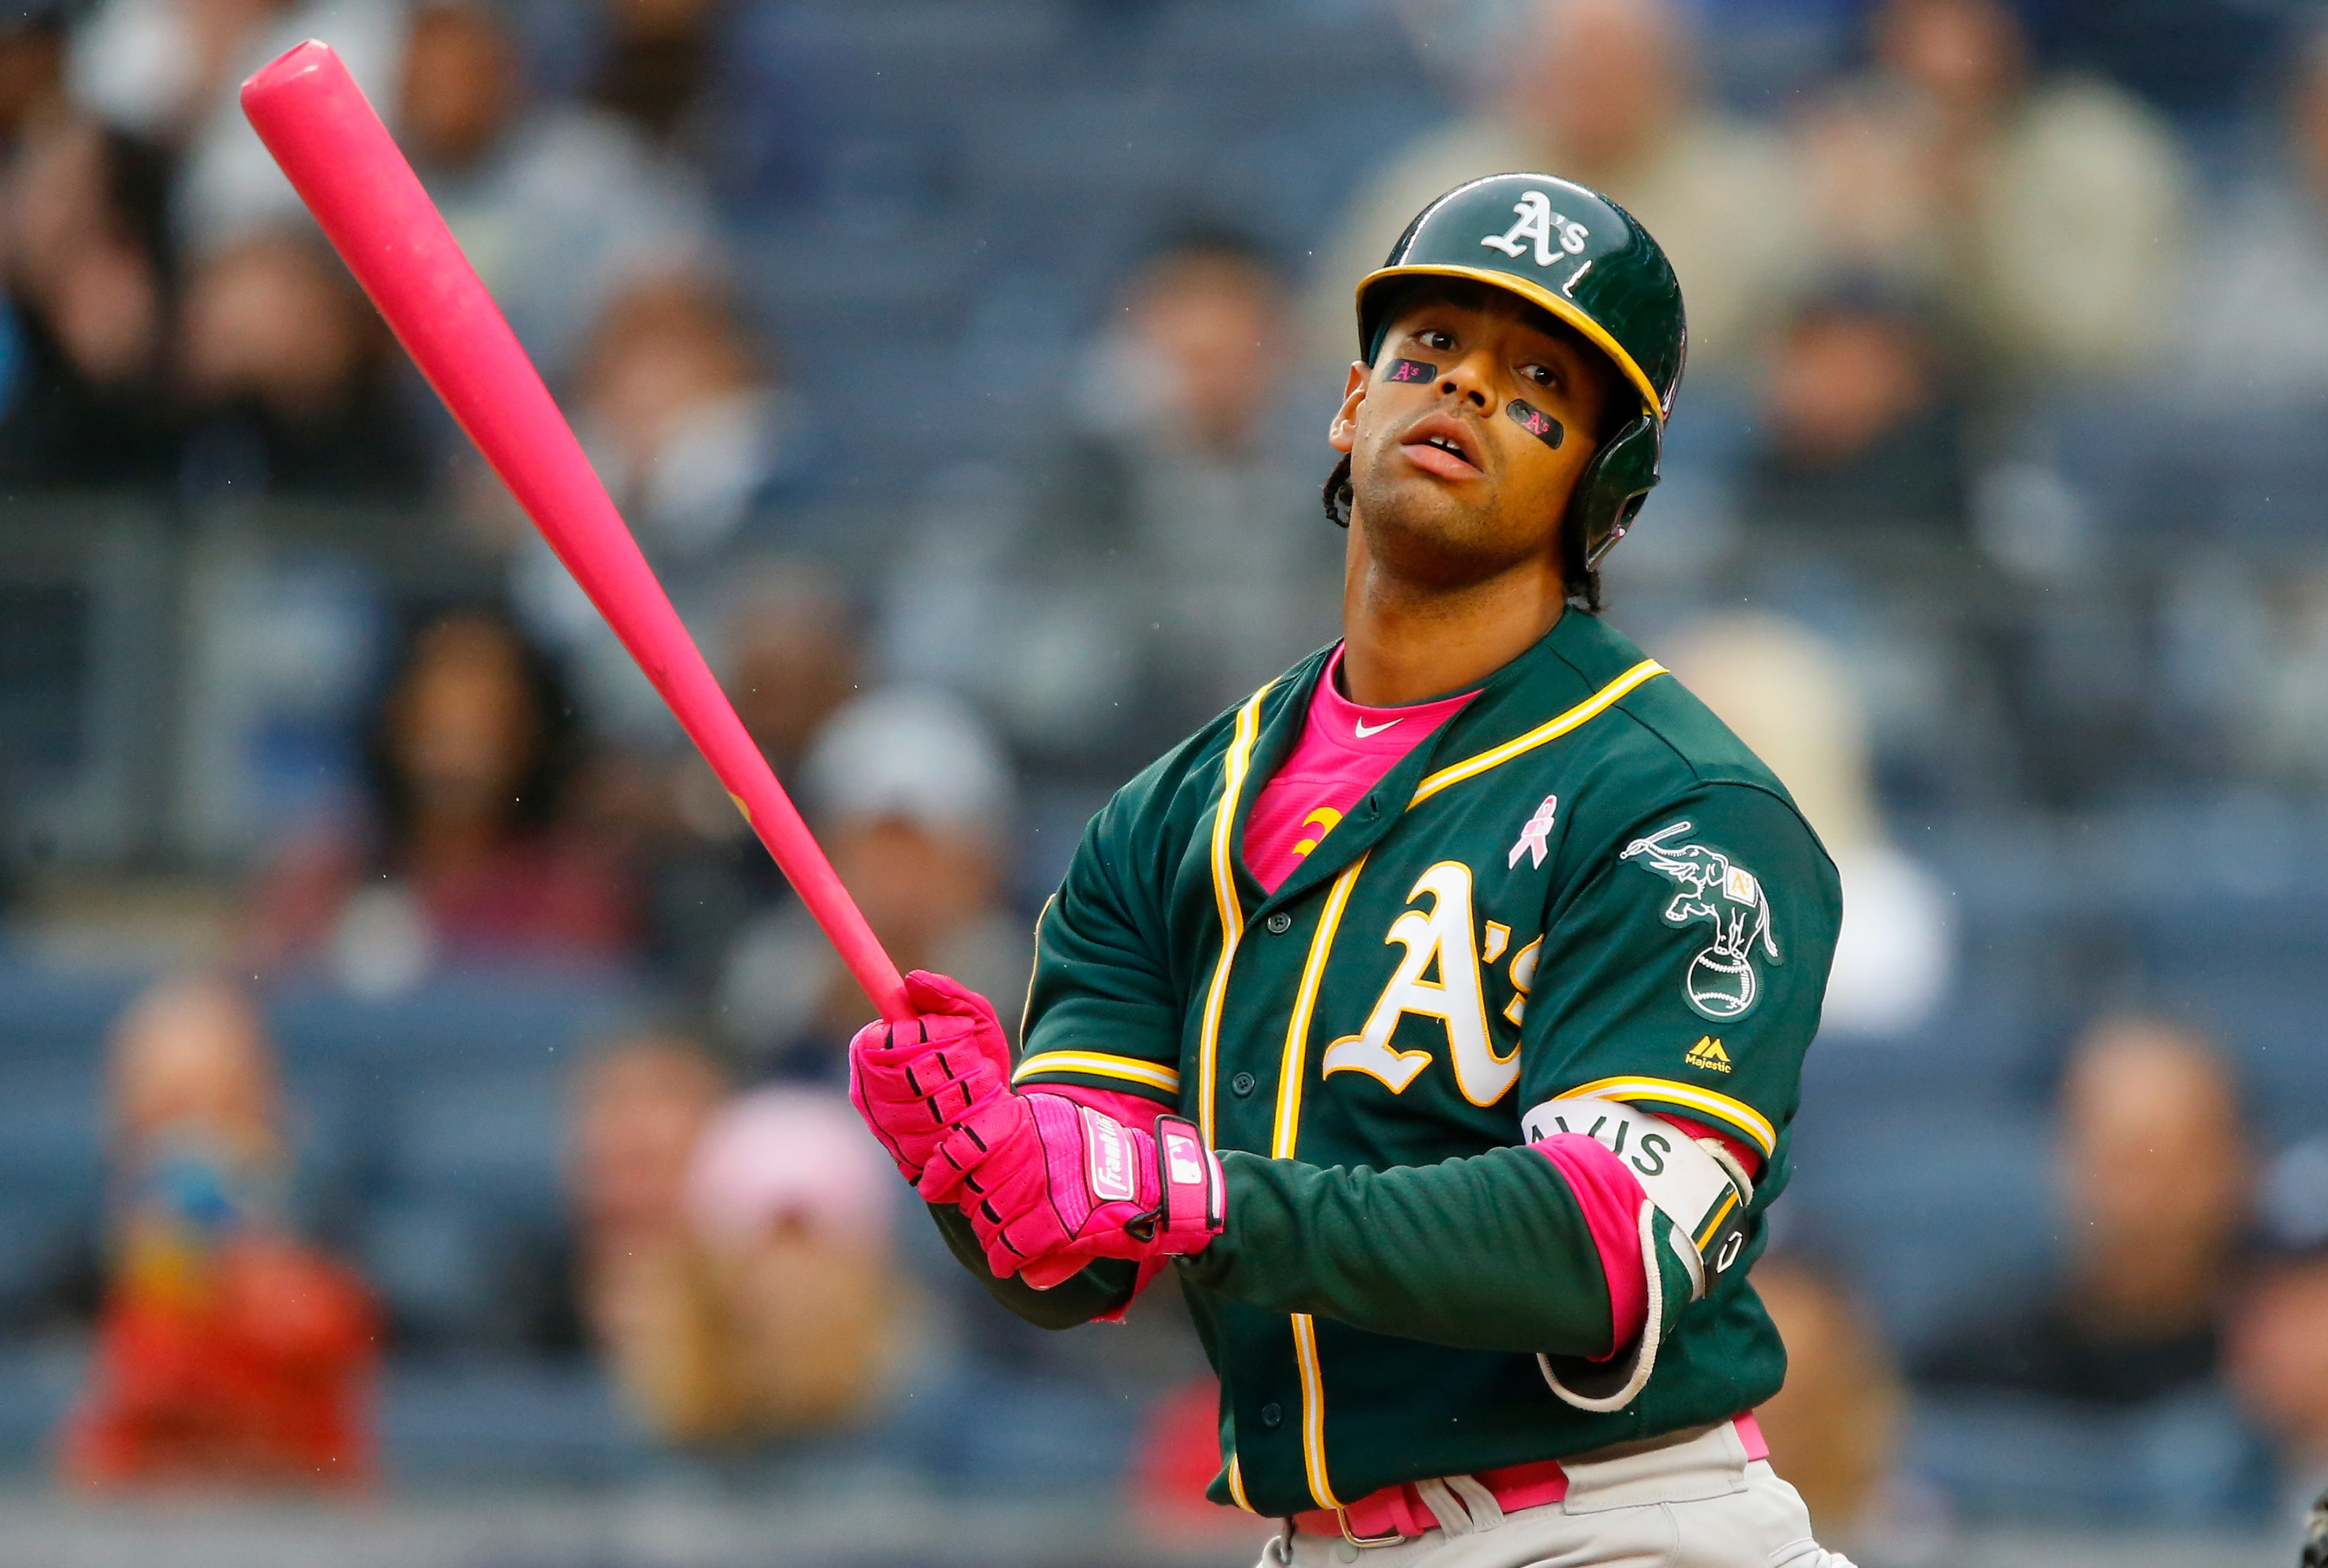 Oakland Athletics' Coco Crisp jogs in at batting practice during a News  Photo - Getty Images